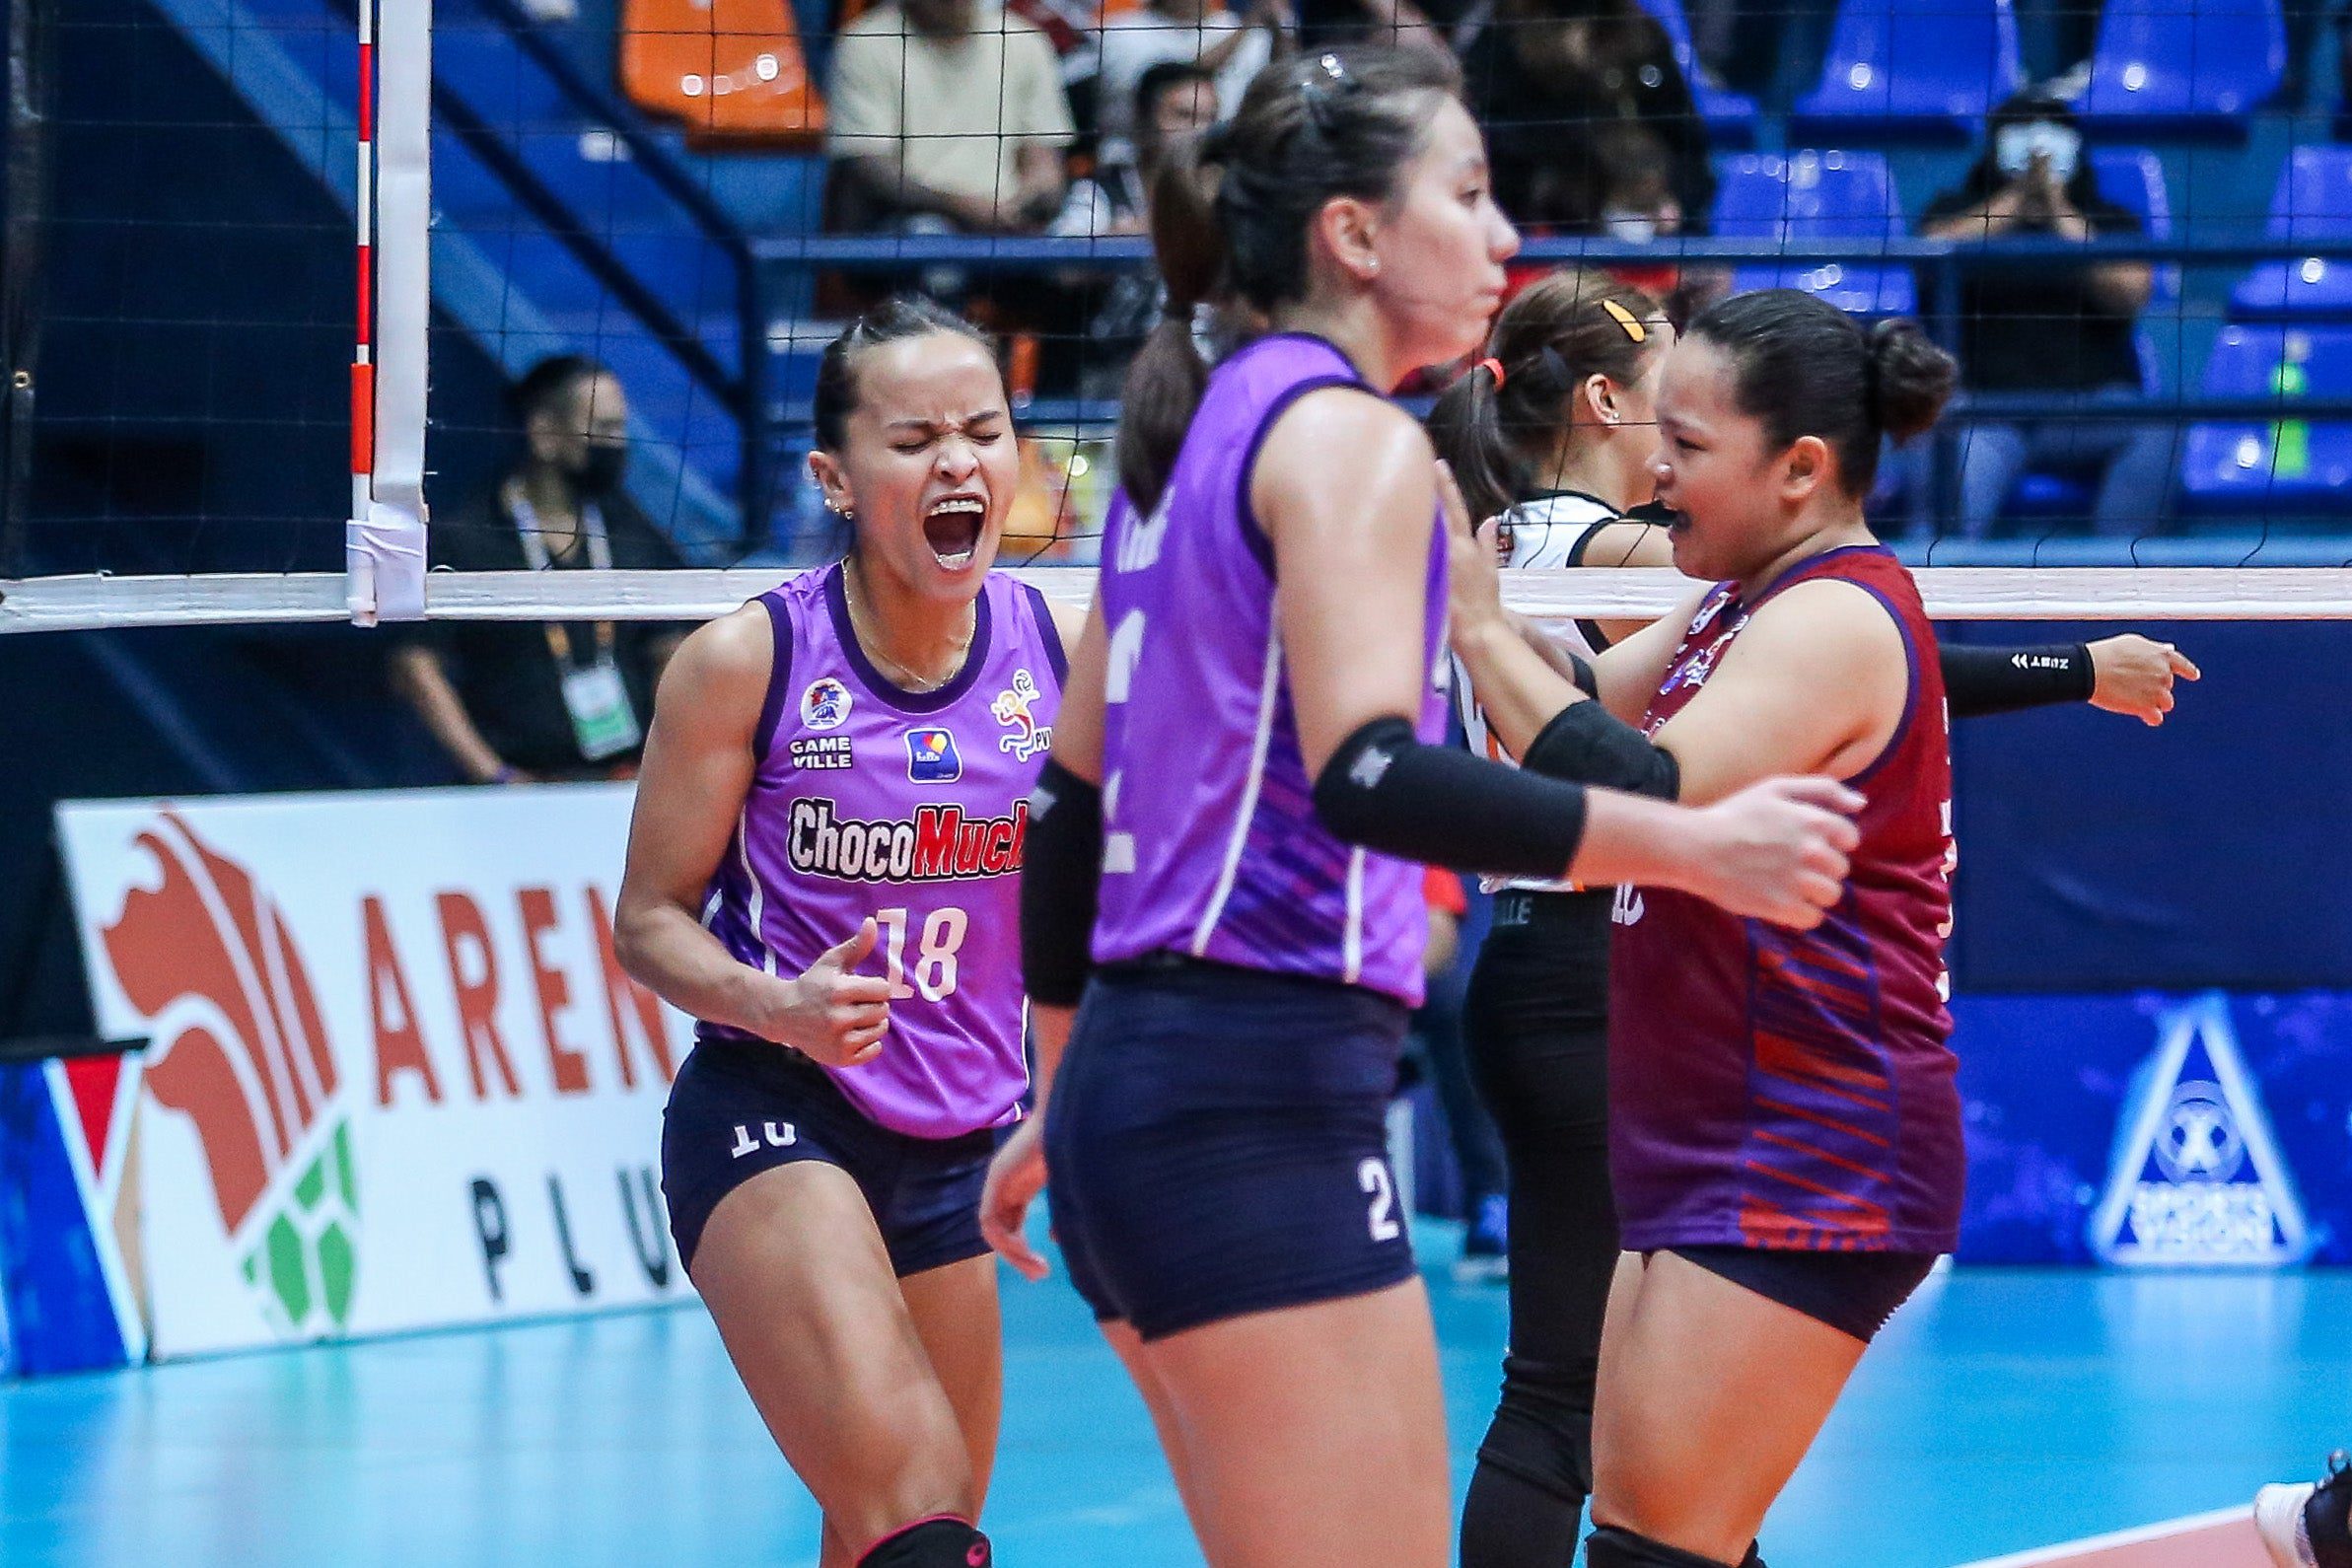 PVL: Desperate to rebound, Sisi Rondina helps ship Choco Mucho’s first win